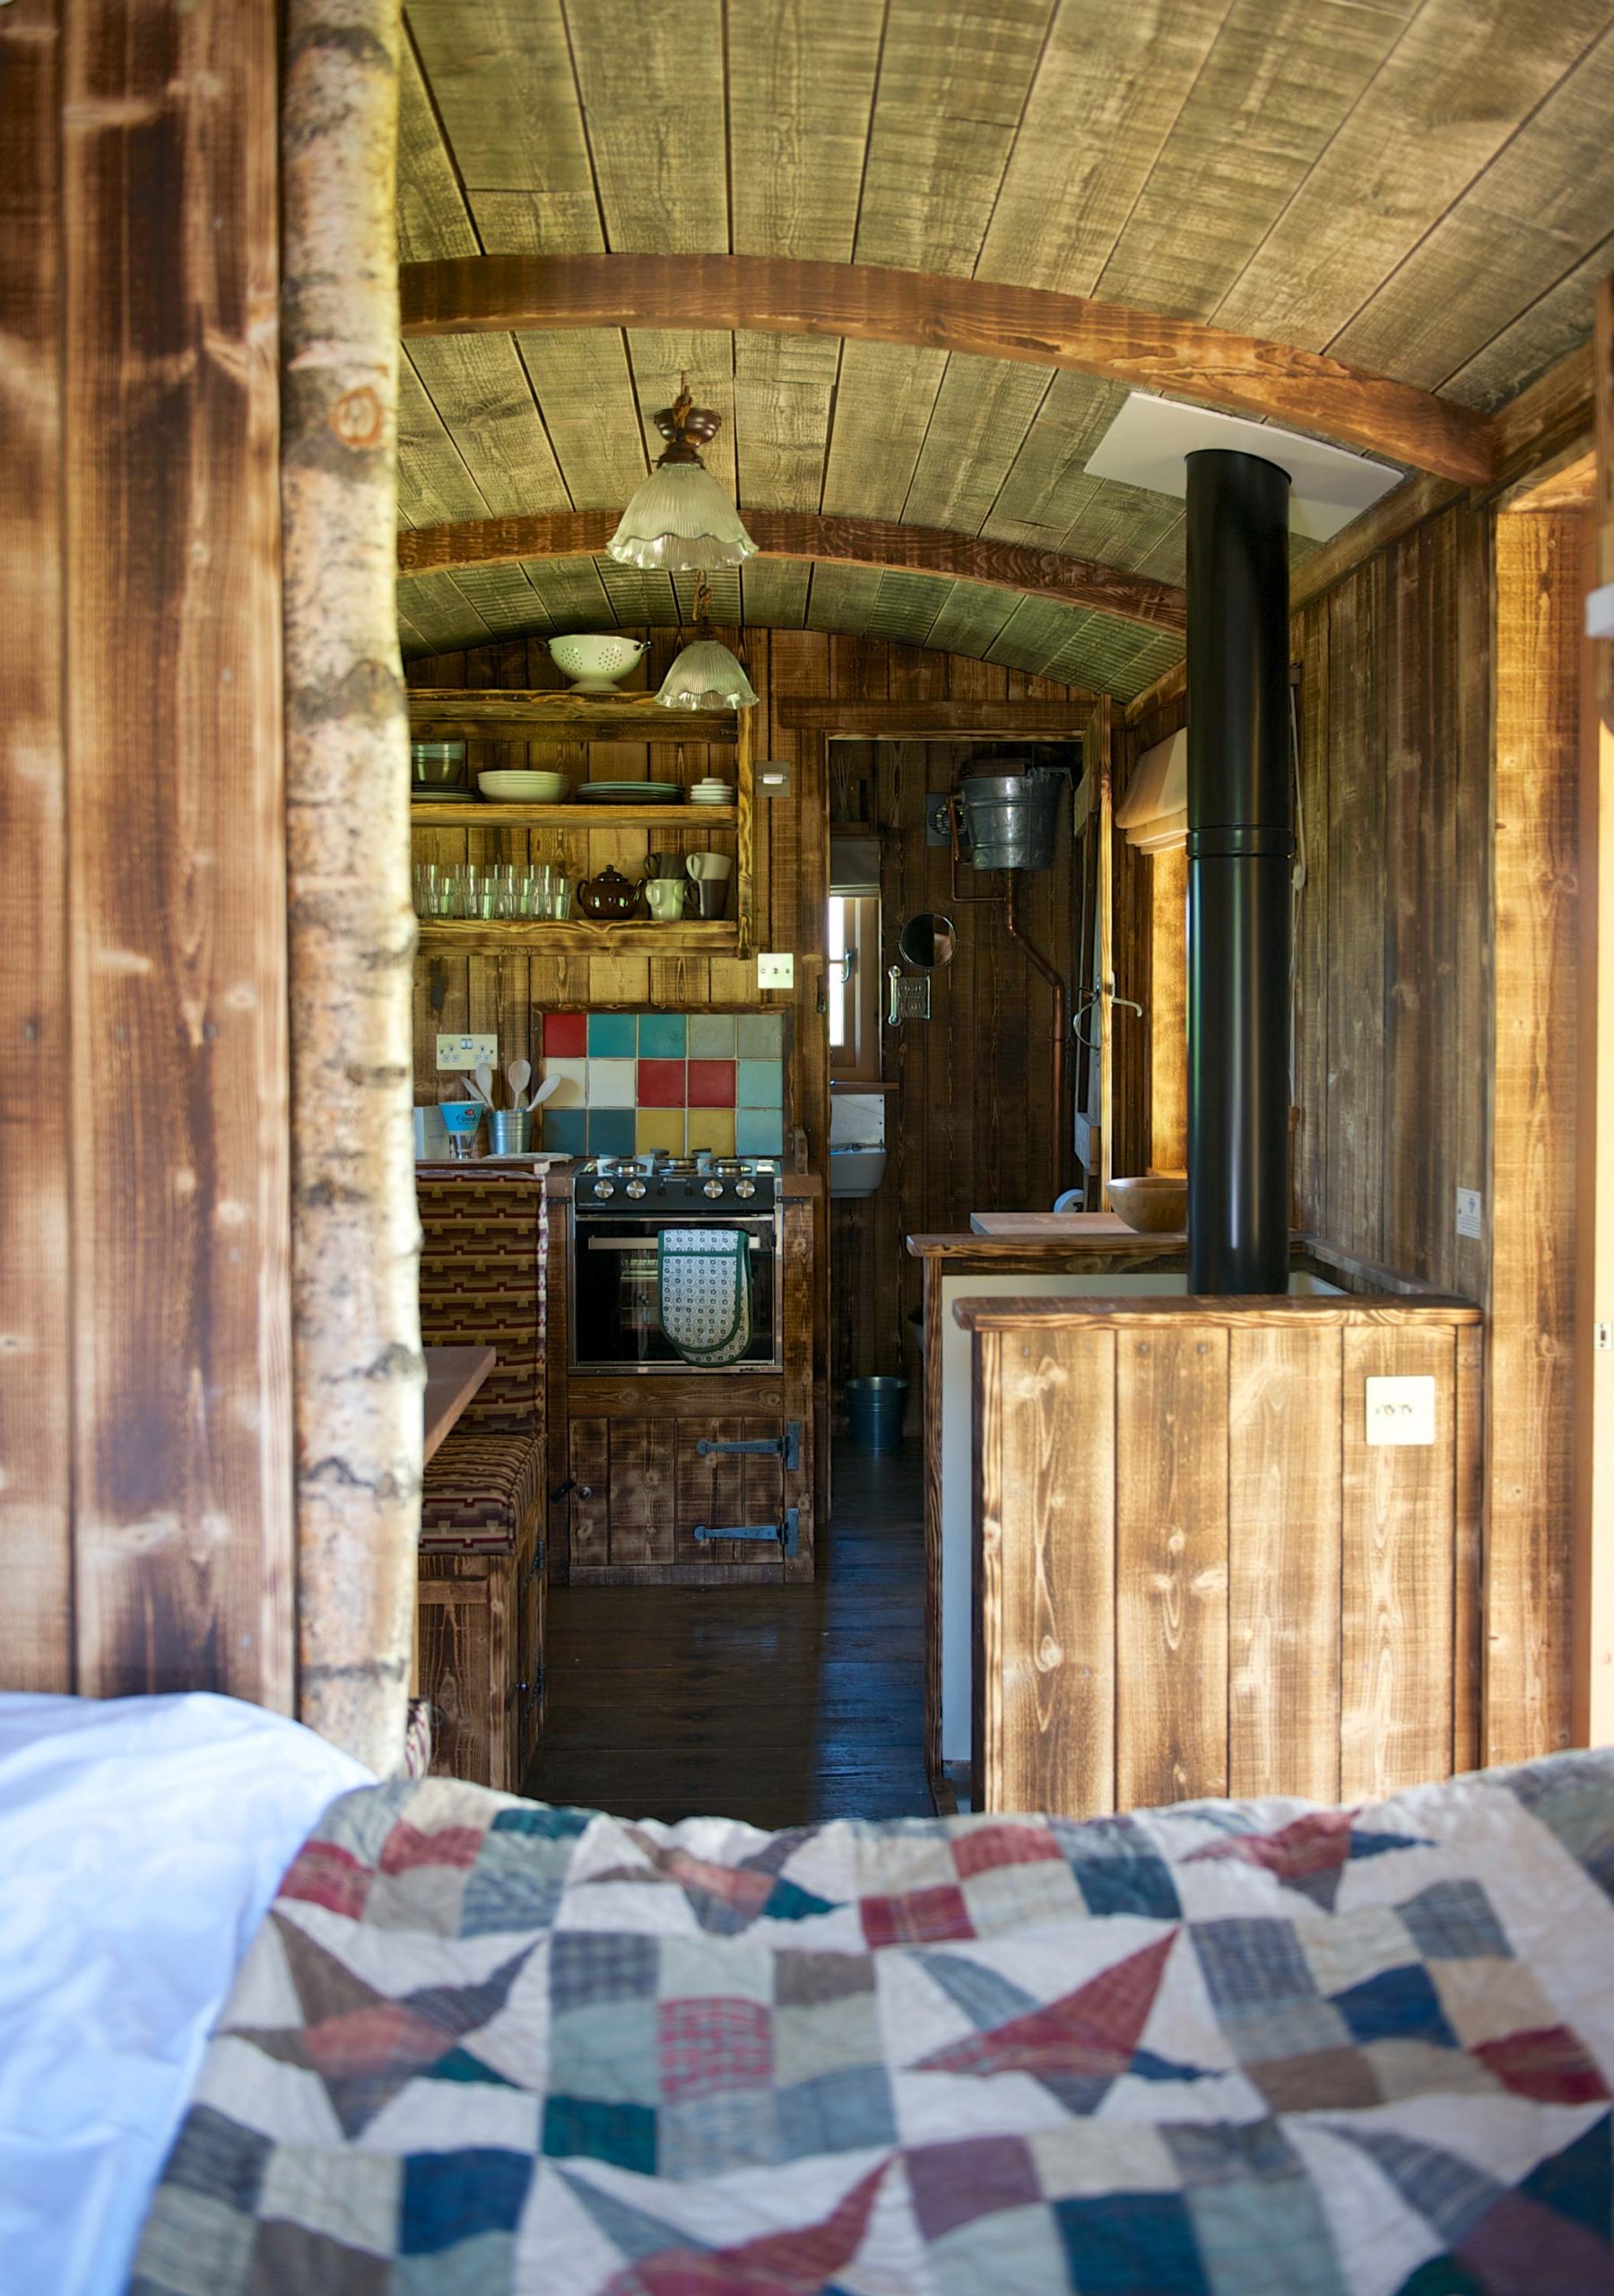 The kitchen inside one of the Cabins at Loose Reins as seen from the bedroom area